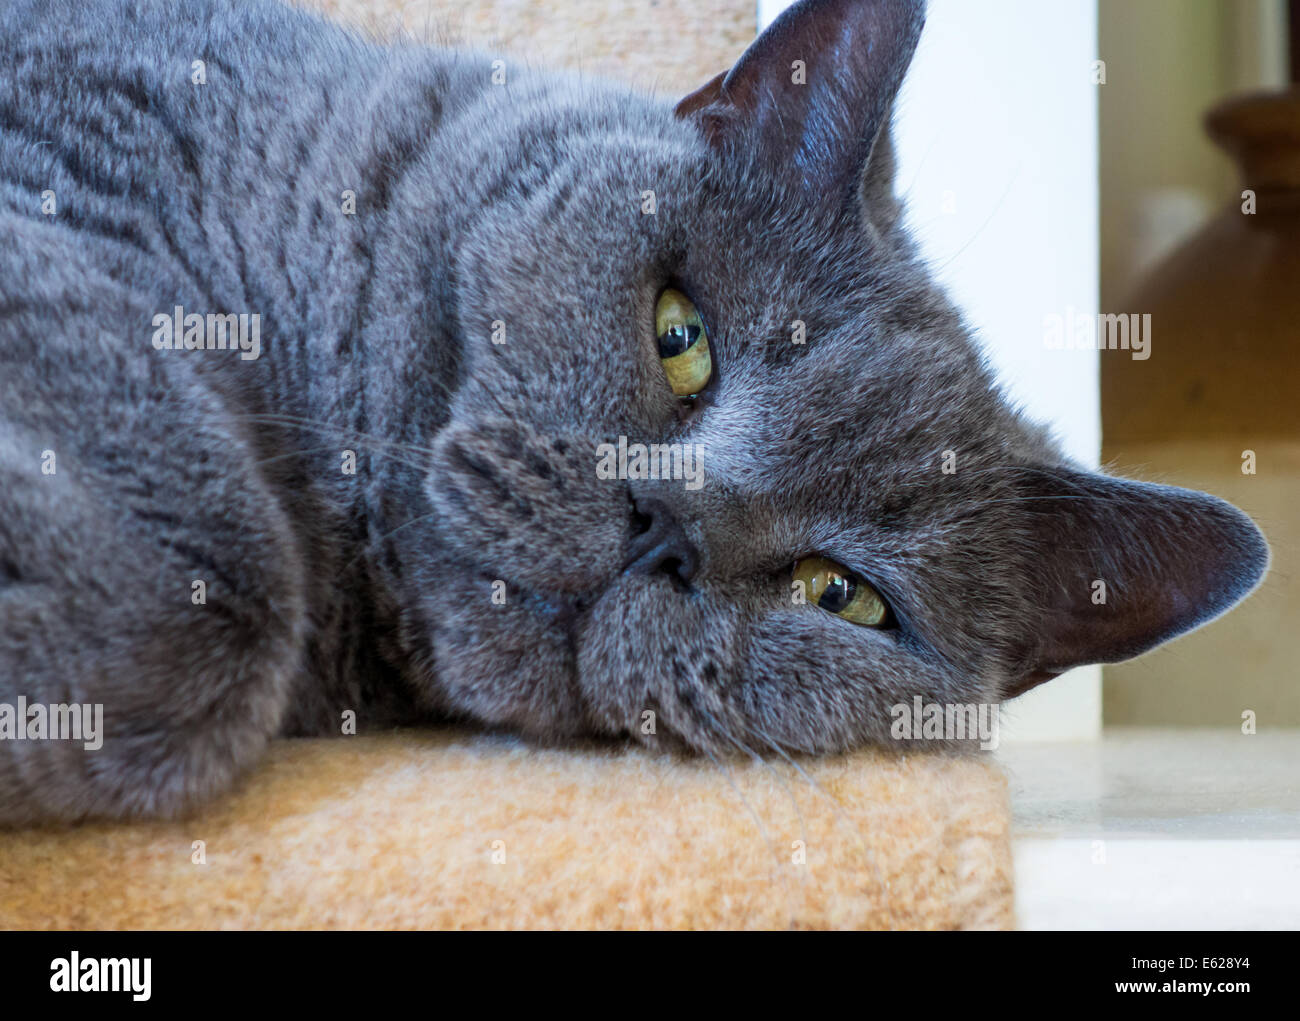 Devon, England. August 2014. A mature male British Blue cat lounges at on the bottom of a flight of stairs. Stock Photo